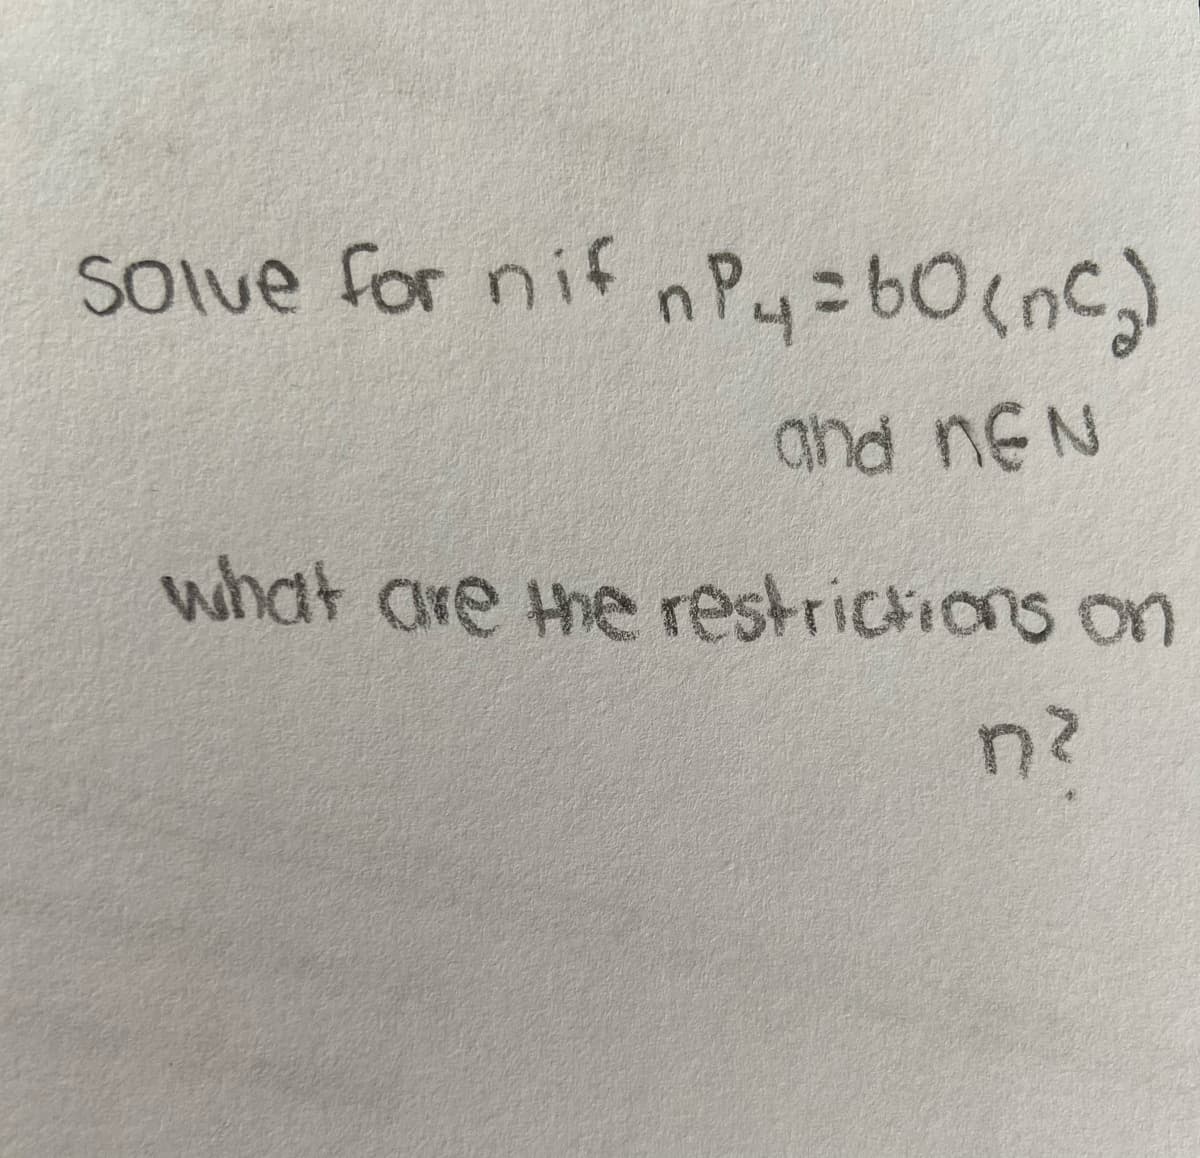 Solve for nif nPy=60(nc)
and nEN
what are the restrictions on
